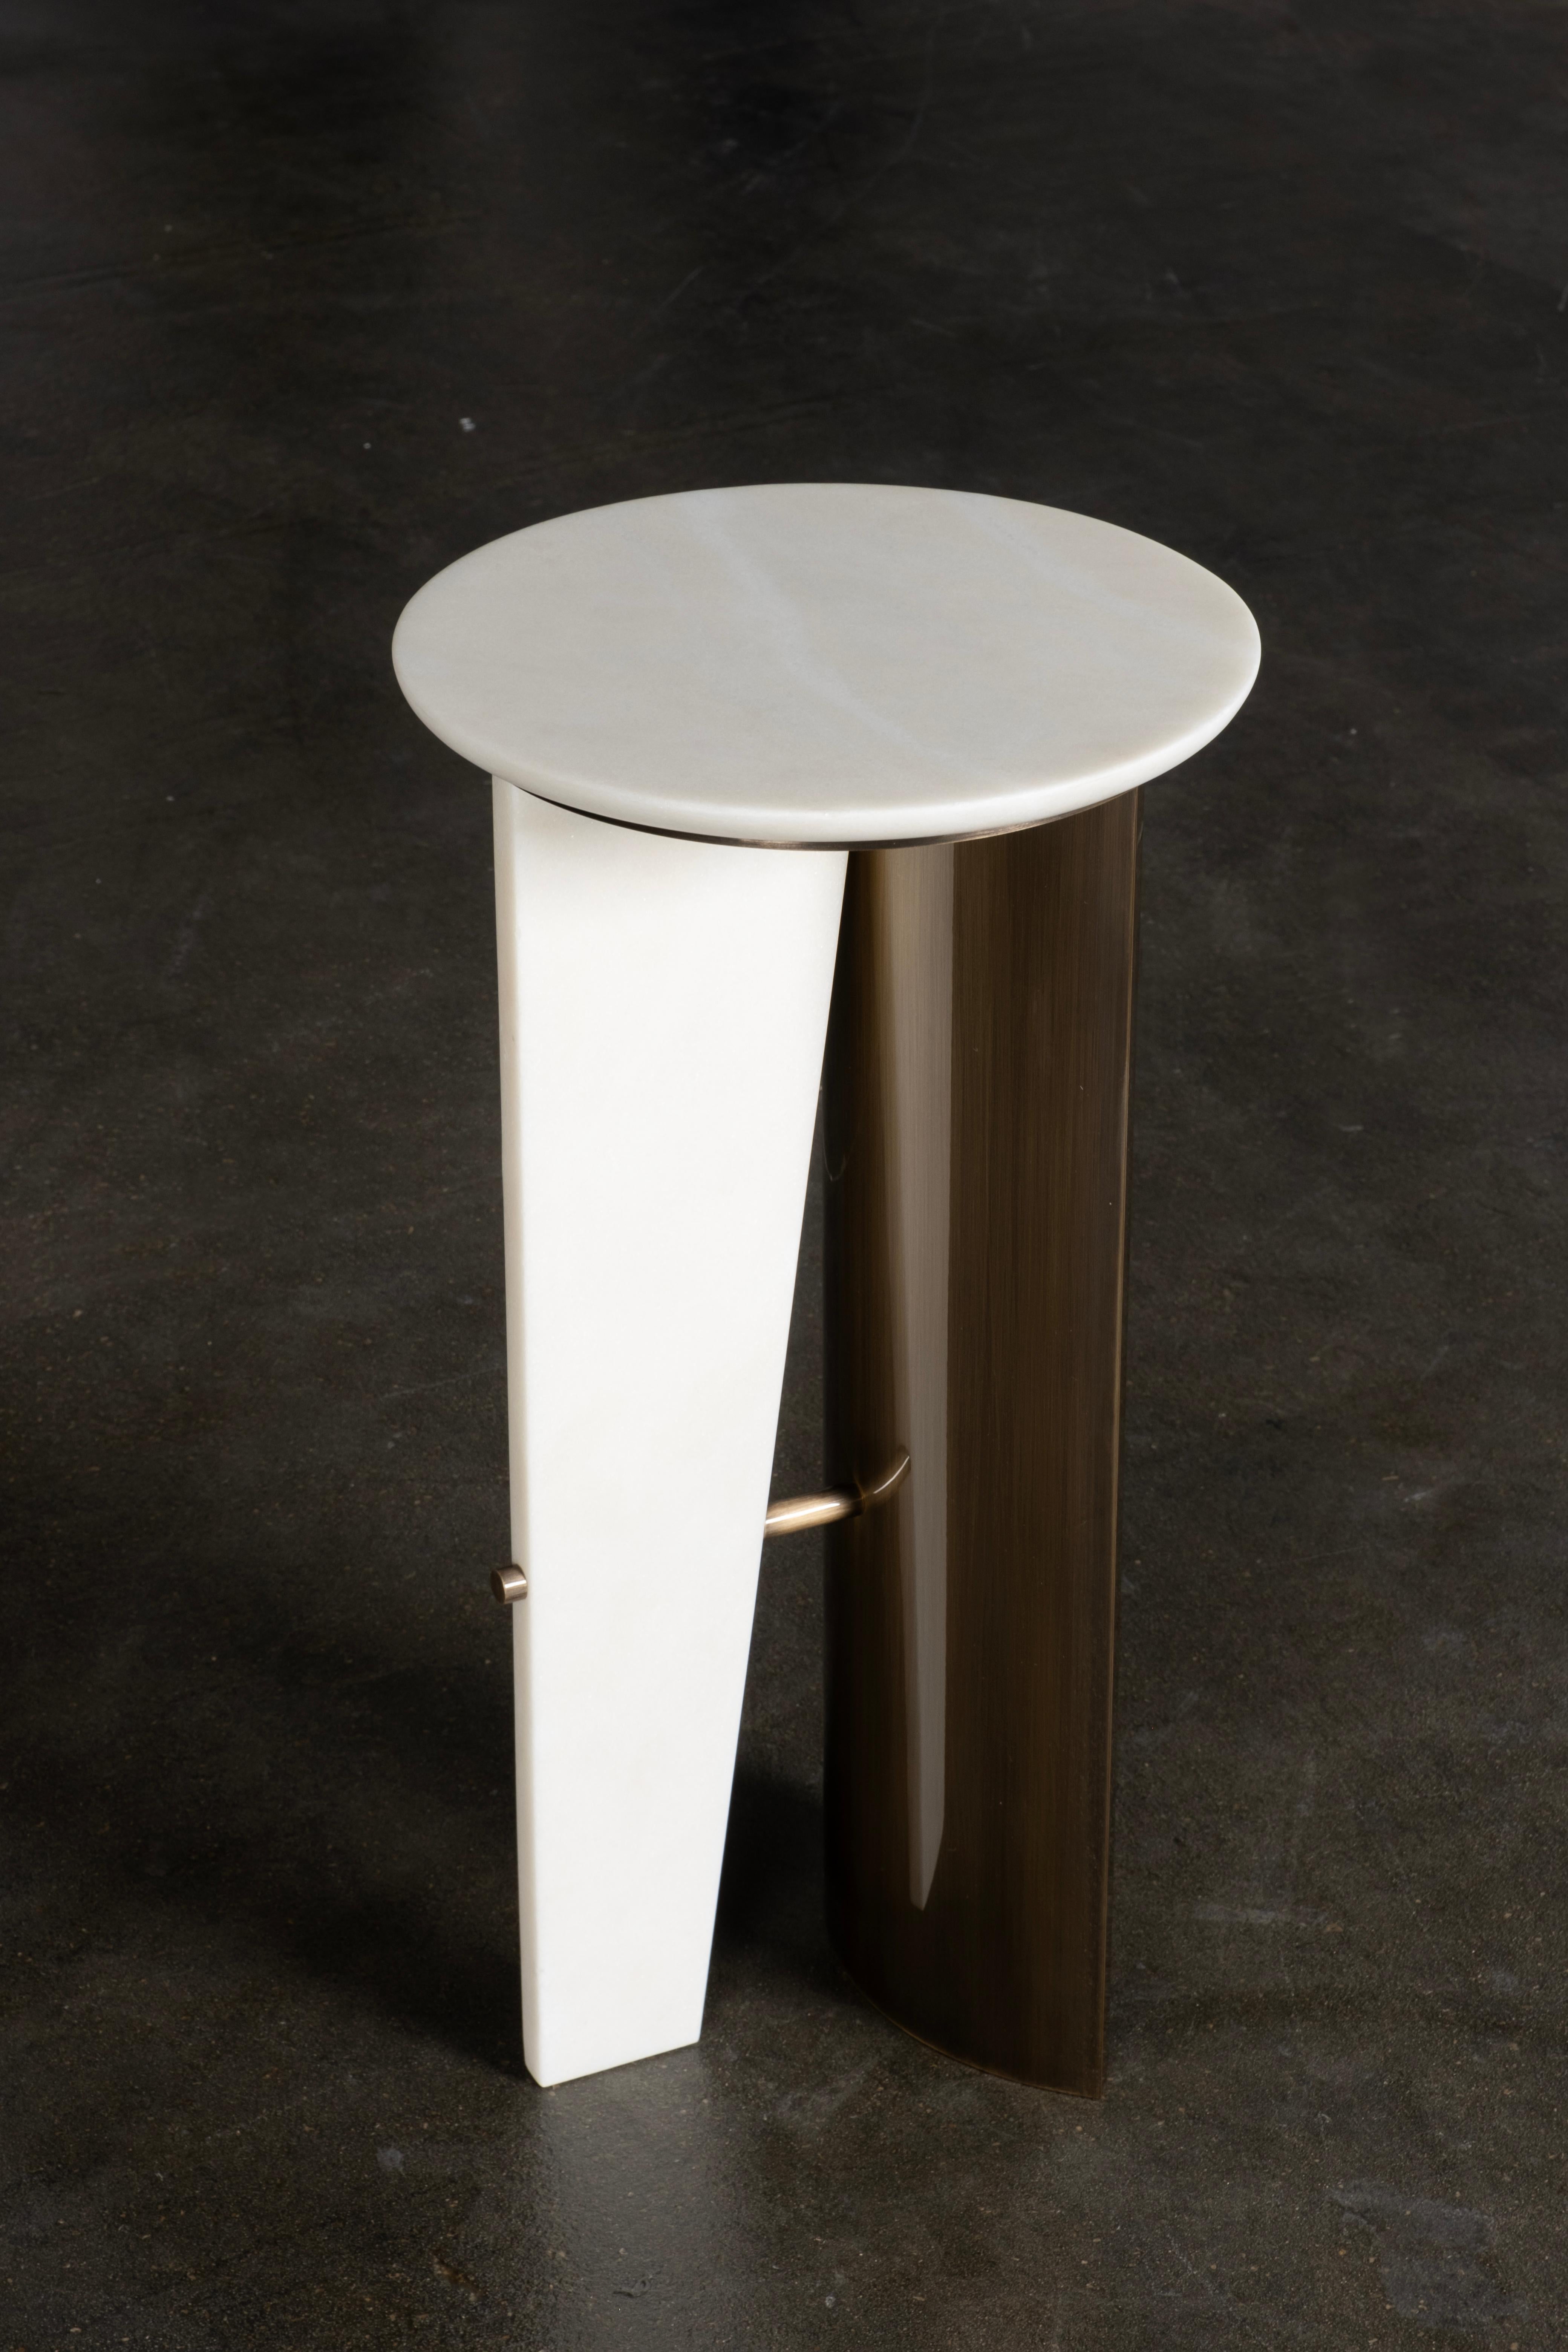 Foice Side Table, Contemporary Collection, Handcrafted in Portugal - Europe by Greenapple.

The Foice marble side table seamlessly combines the echoes of the Neolithic age with contemporary design. Crafted from Calacatta Bianco marble, the table’s